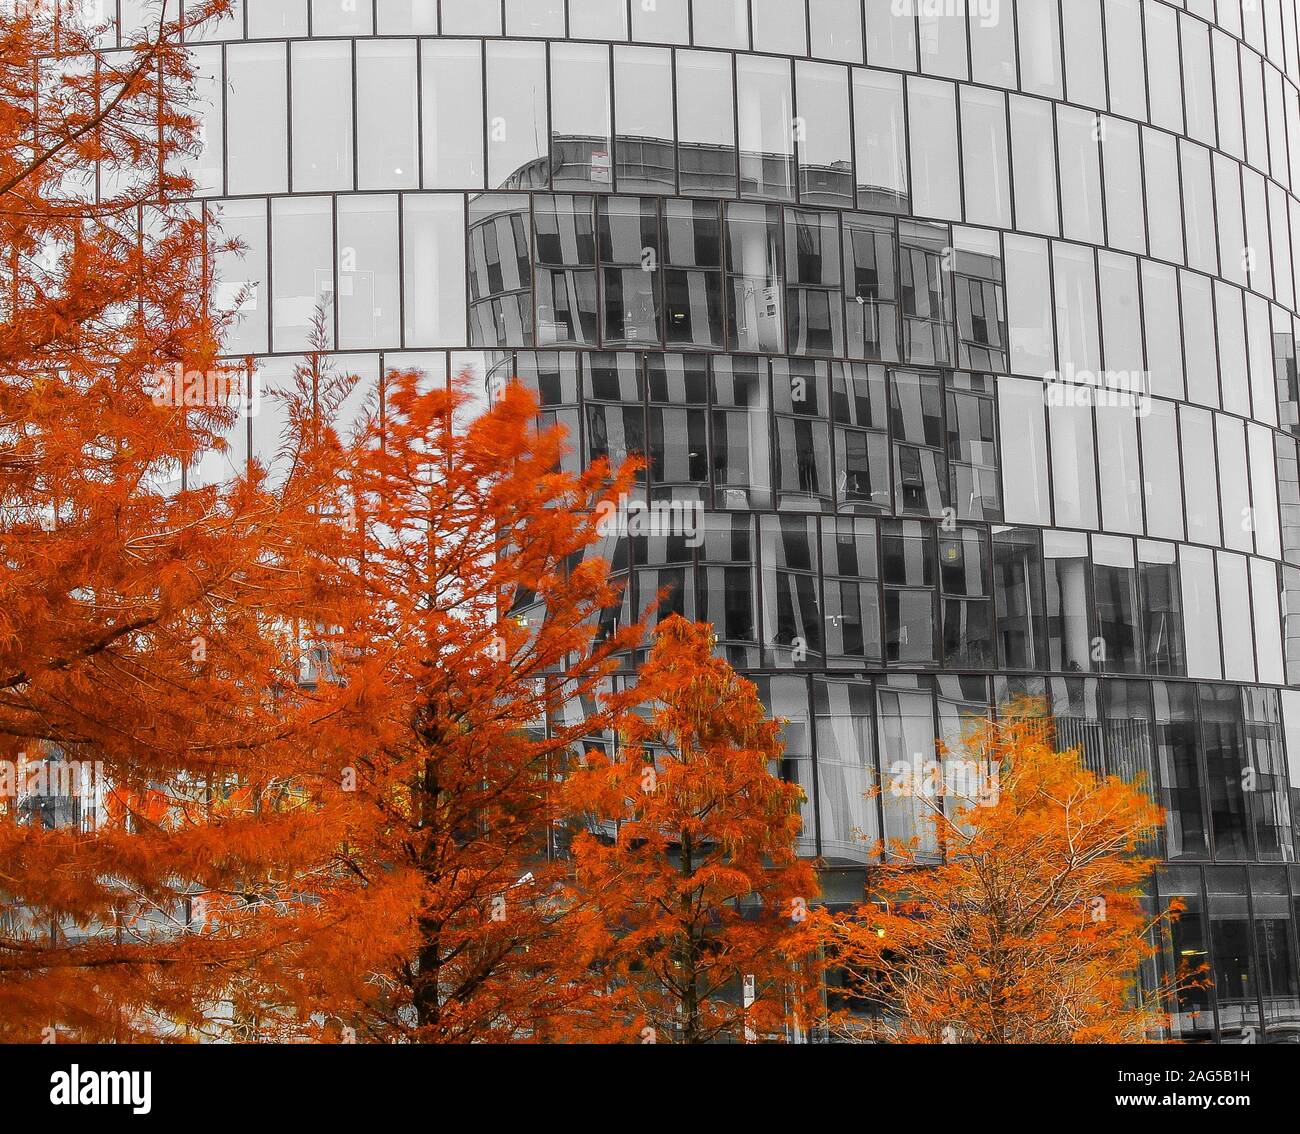 Low angle shot of a modern architecture building with mirror walls and trees with orange leaves Stock Photo